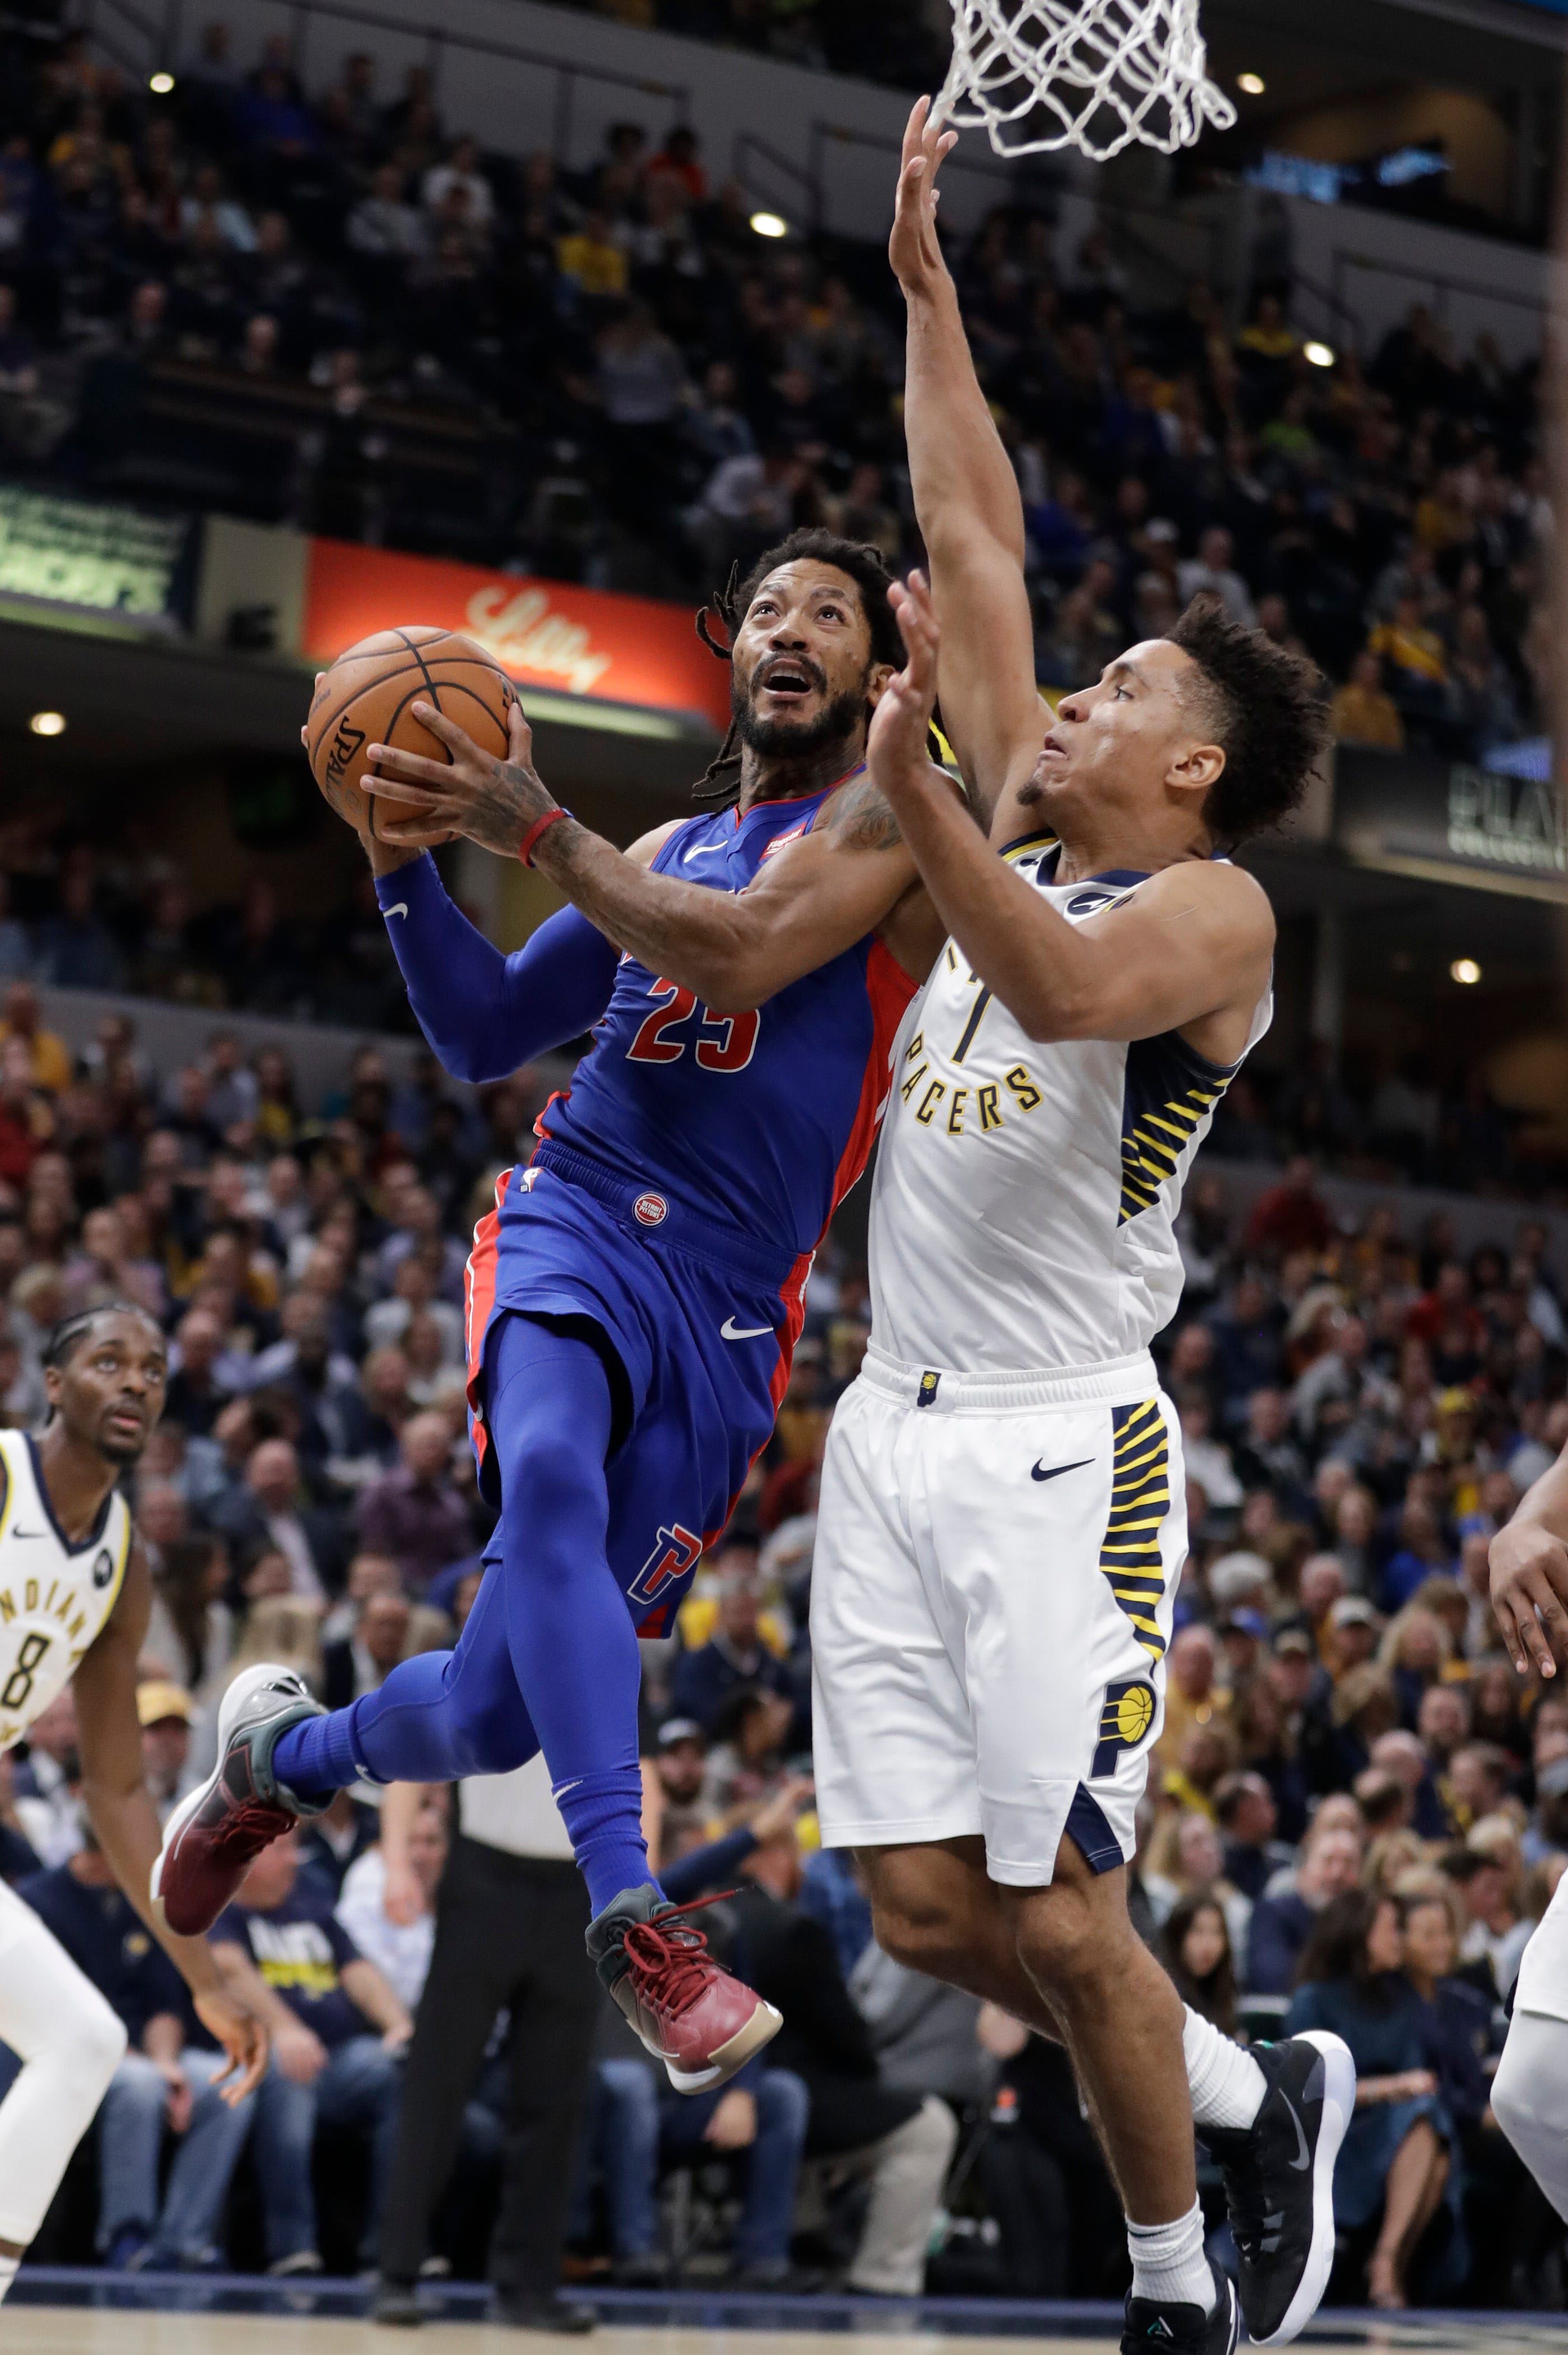 Detroit Pistons ' Derrick Rose, left, puts up a shot next to Indiana Pacers ' Malcolm Brogdon during the first half.